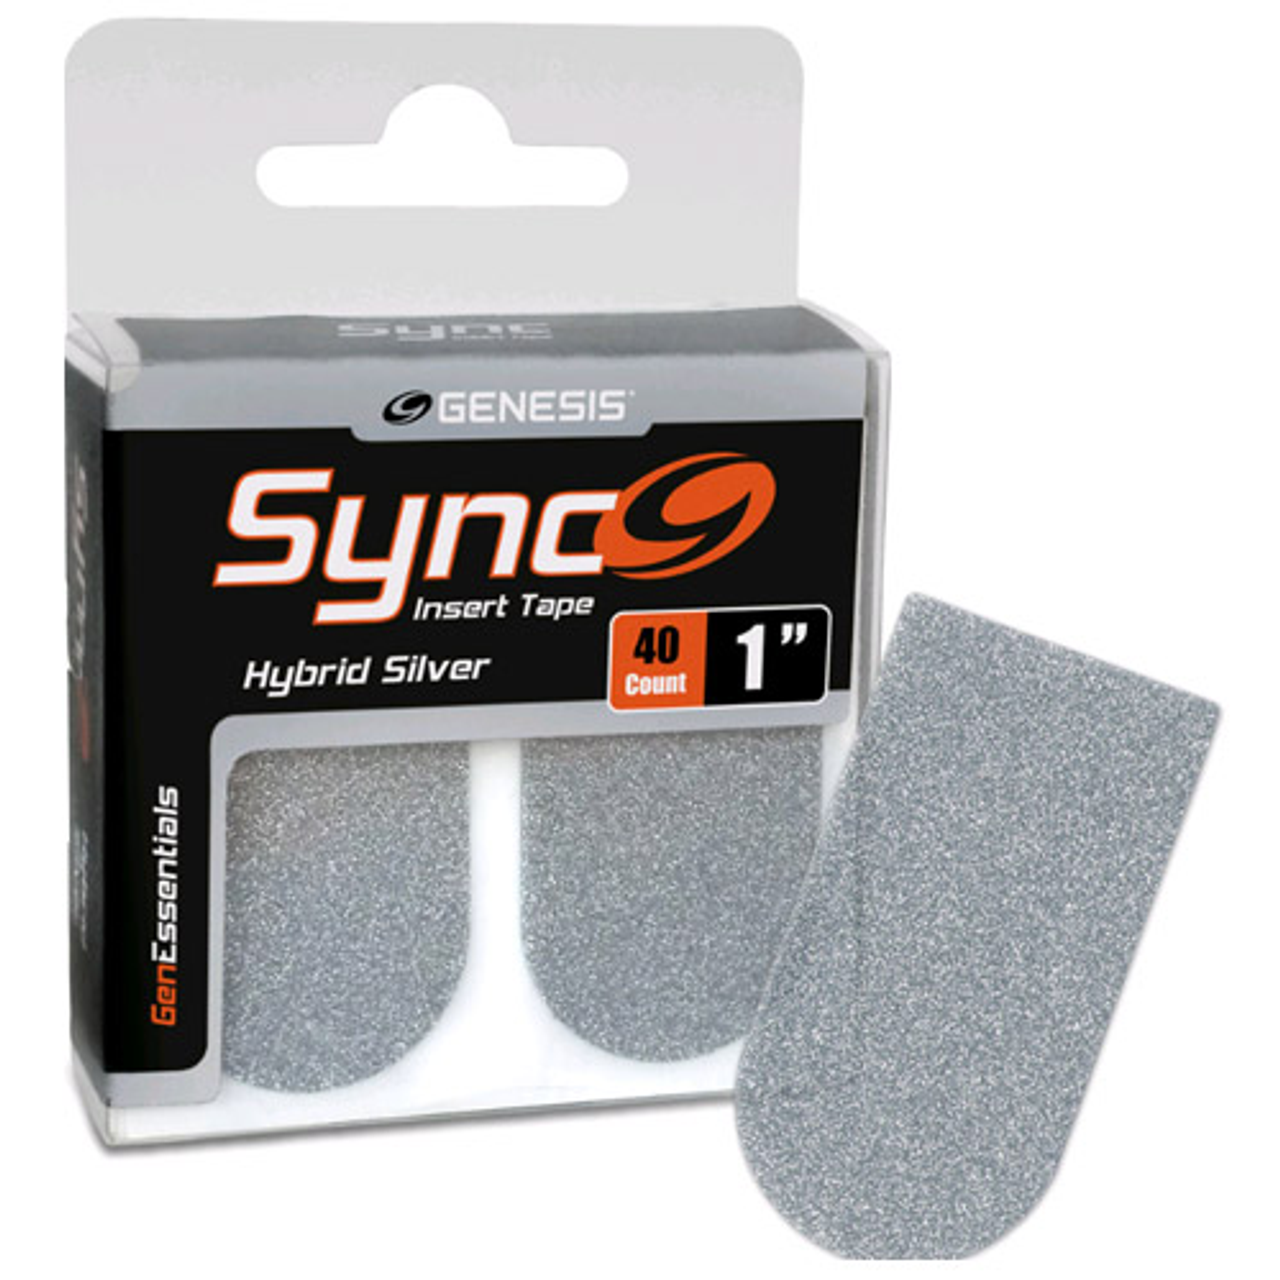 Genesis Sync Silver 1" Bowling Tape - 40 Pack